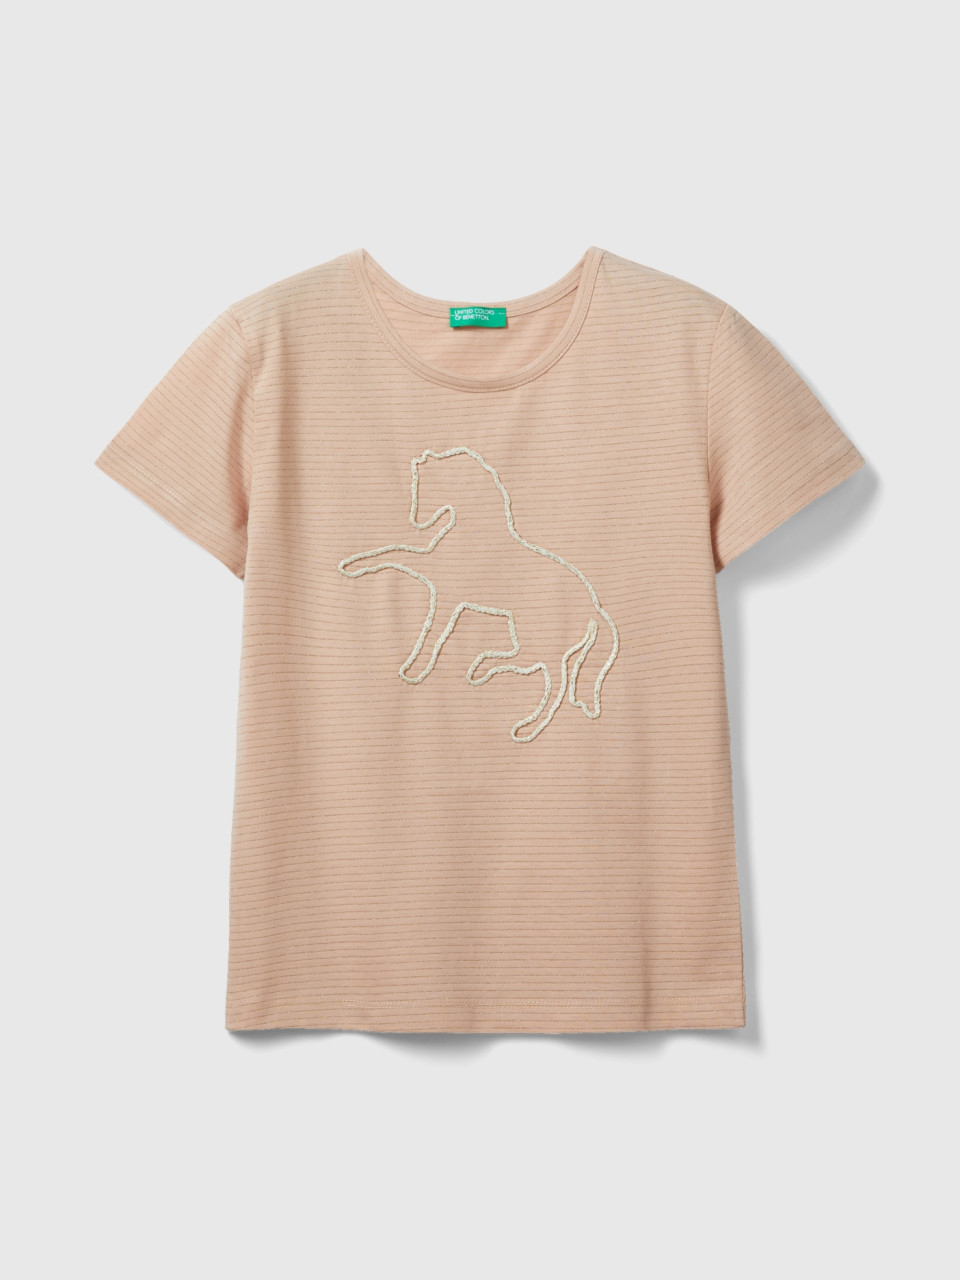 Benetton, T-shirt With Cord Embroidery, Soft Pink, Kids